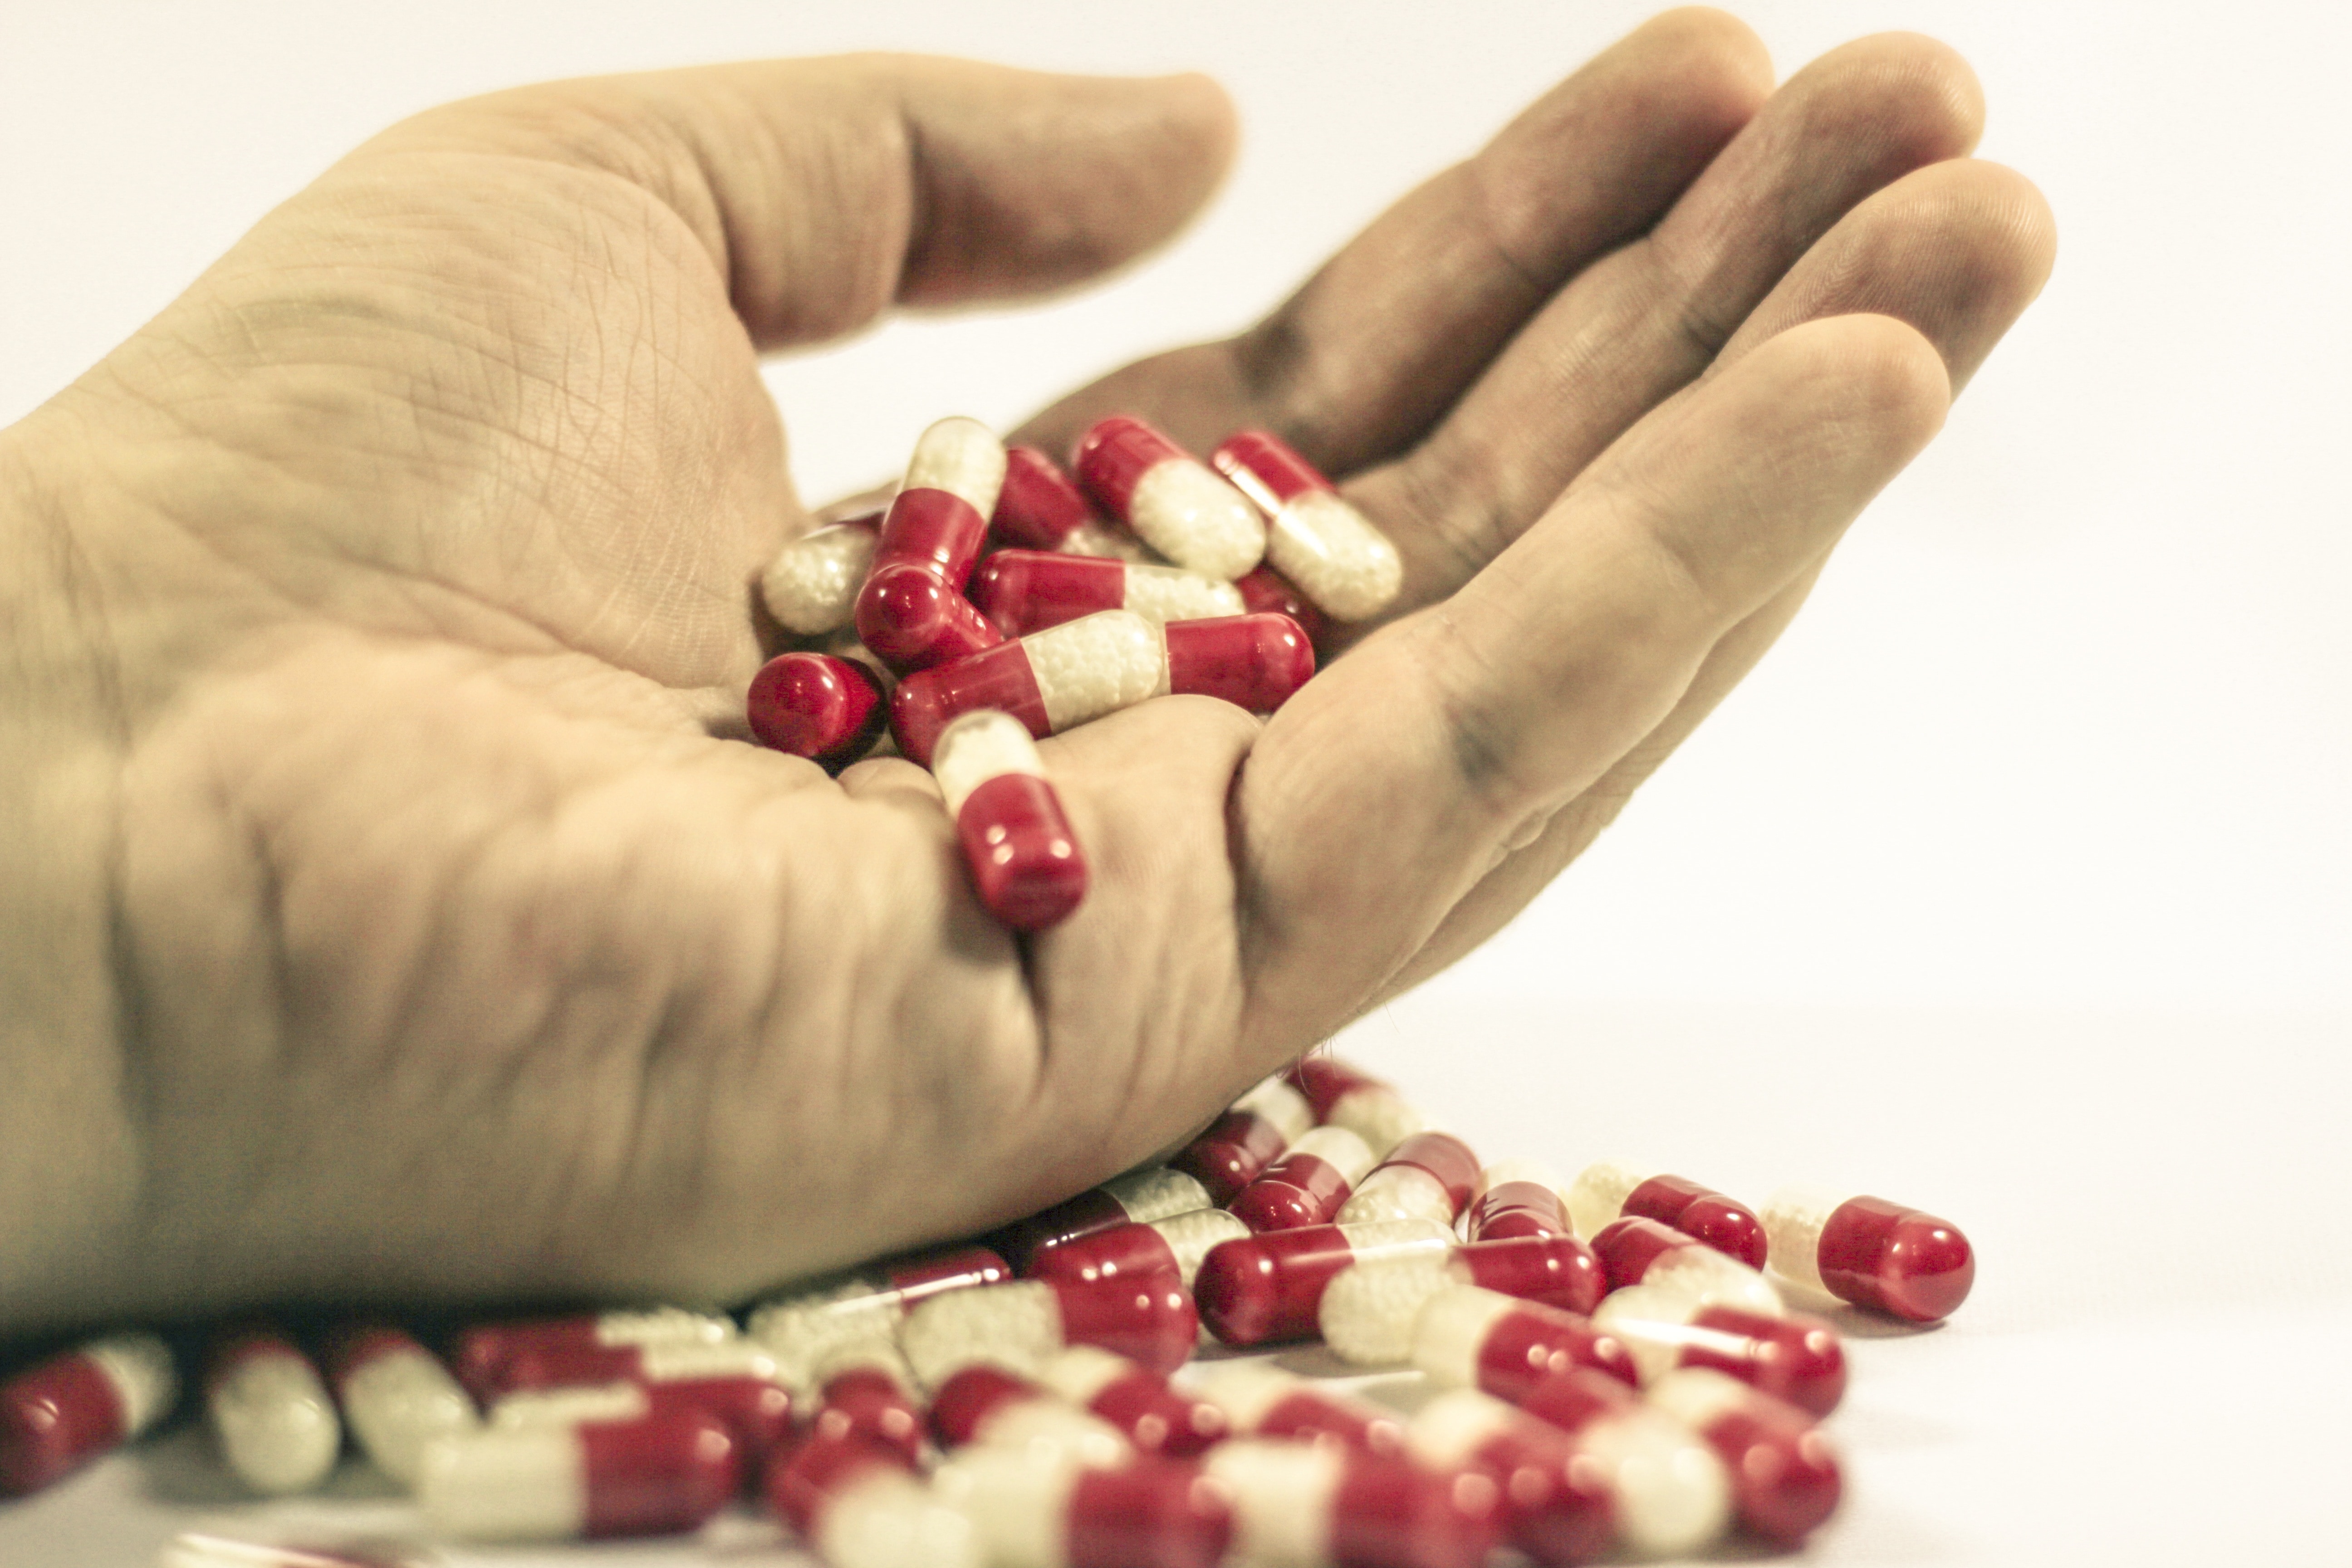 white and red medication capsules on person's hand